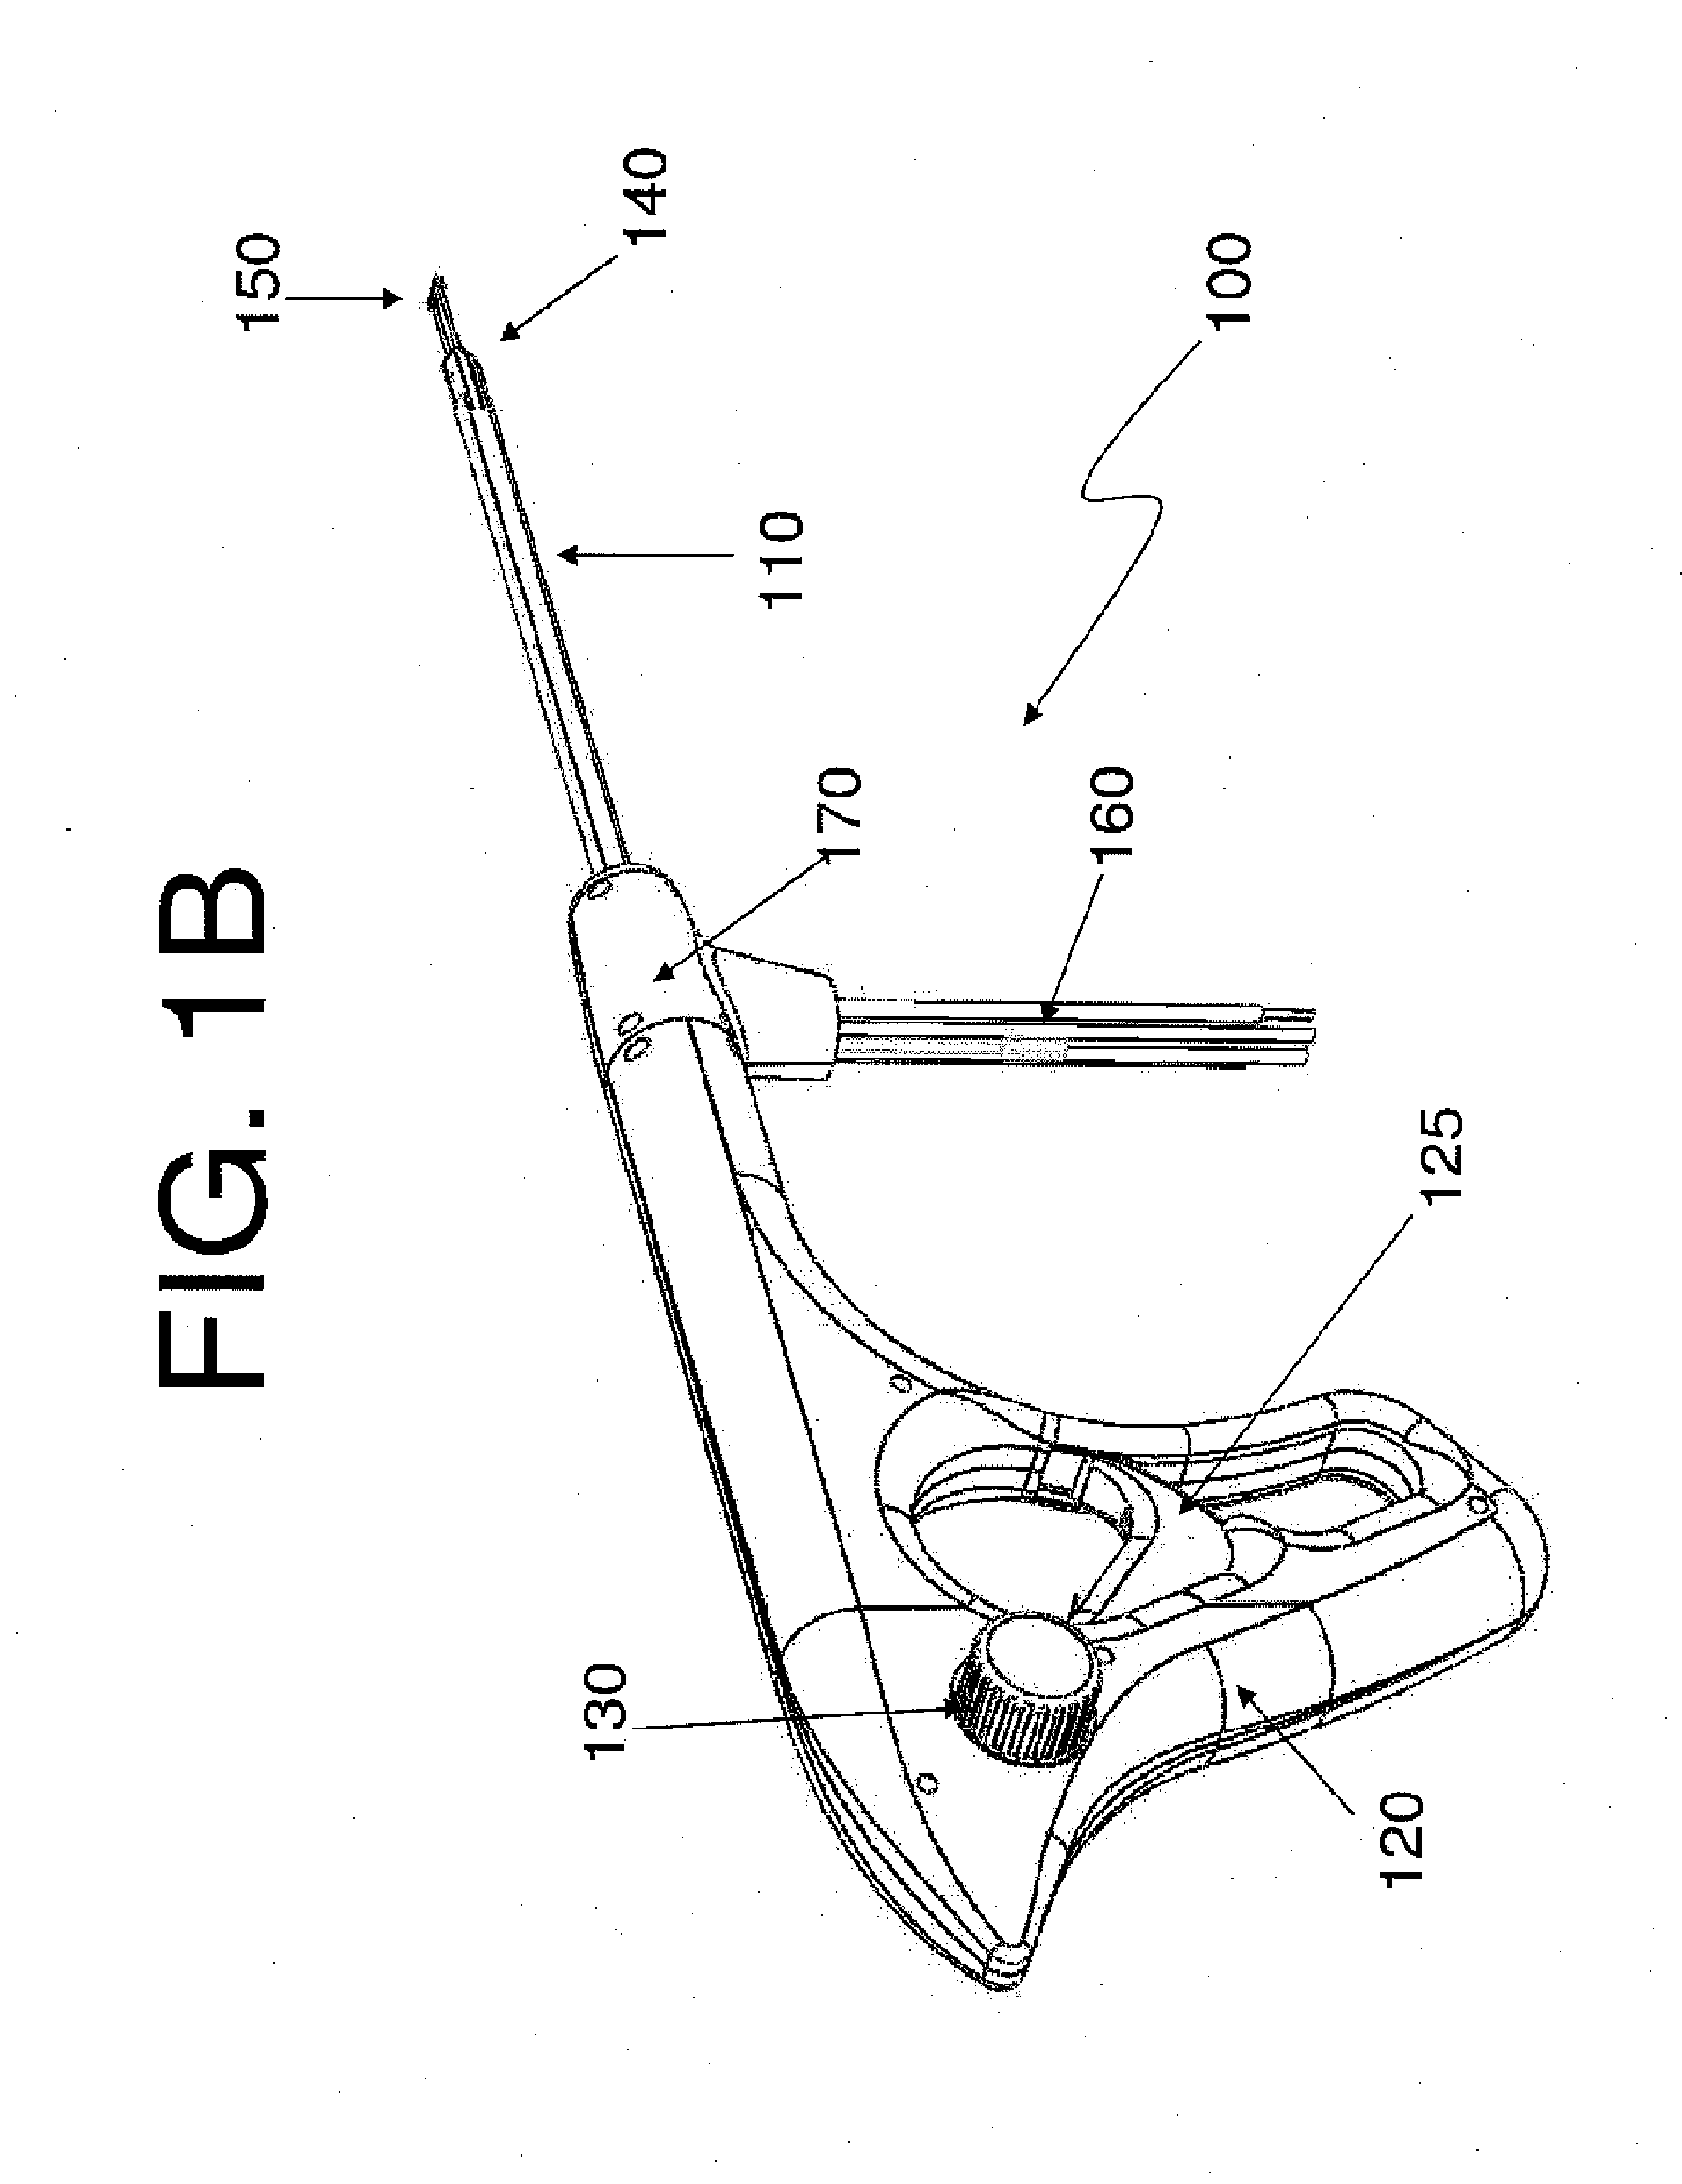 Tissue Modification Devices and Methods of Using The Same